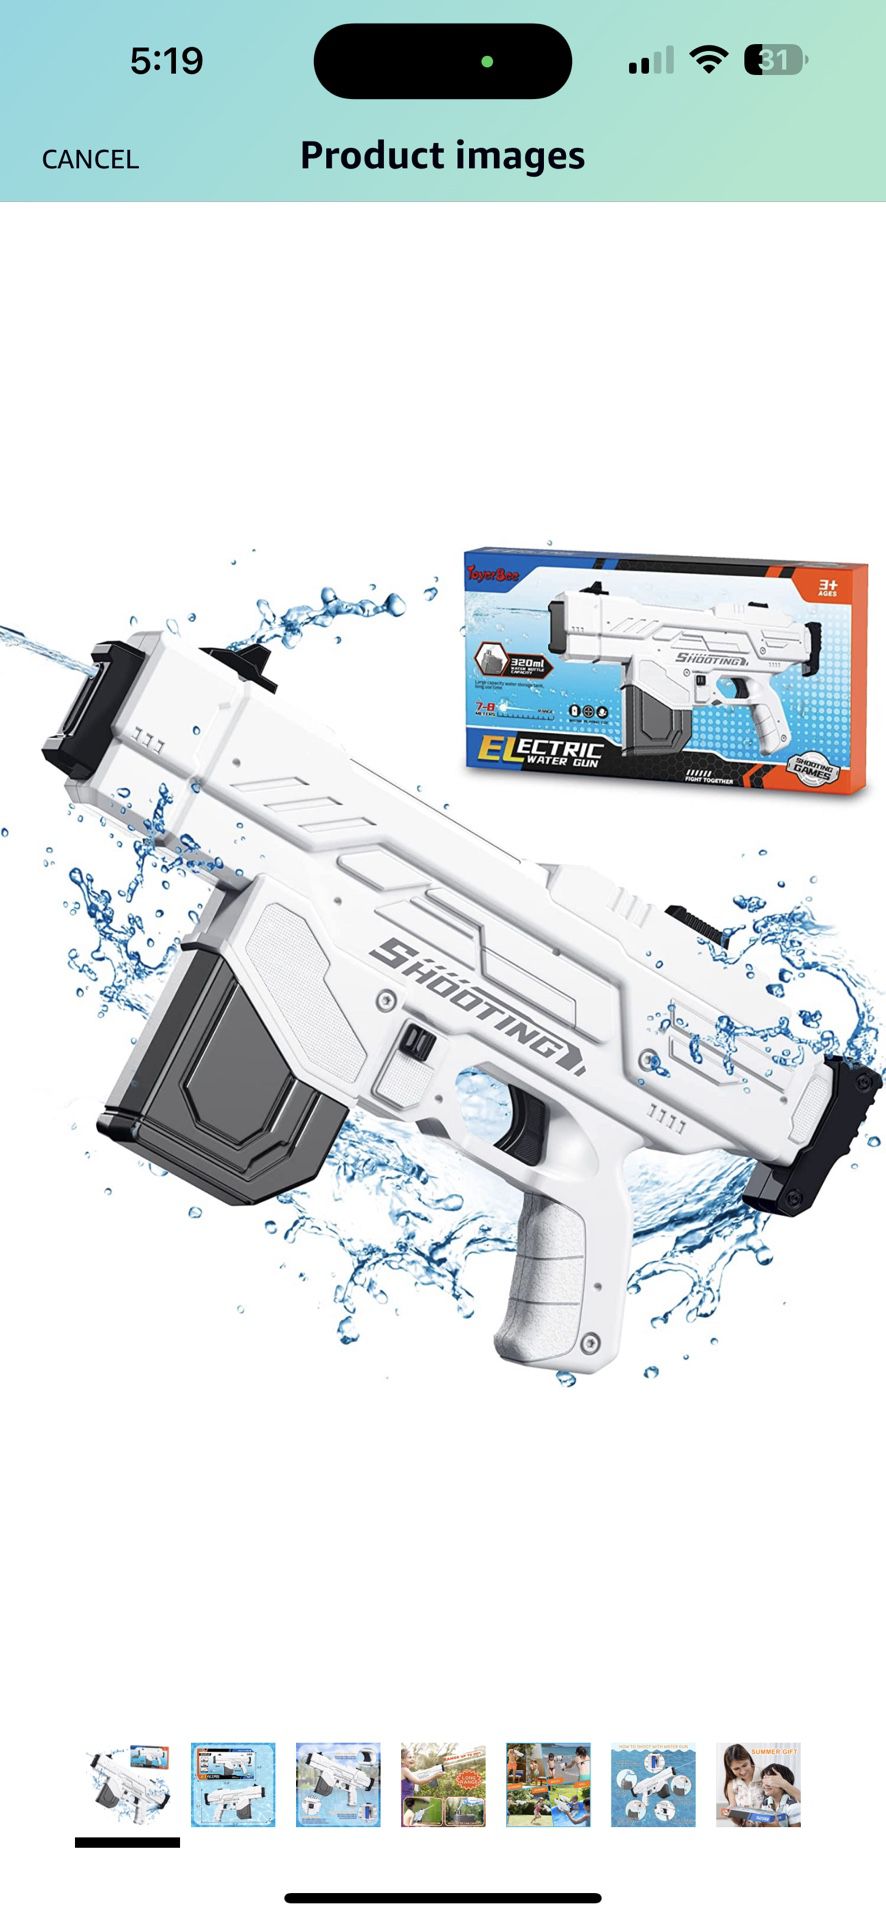 Electric Water Gun for Kids & Adults with 320CC High Capacity, Squirt Guns up to 26 FT Range, Automatic Water Gun Toy, Swimming Pool/Beach Party Games